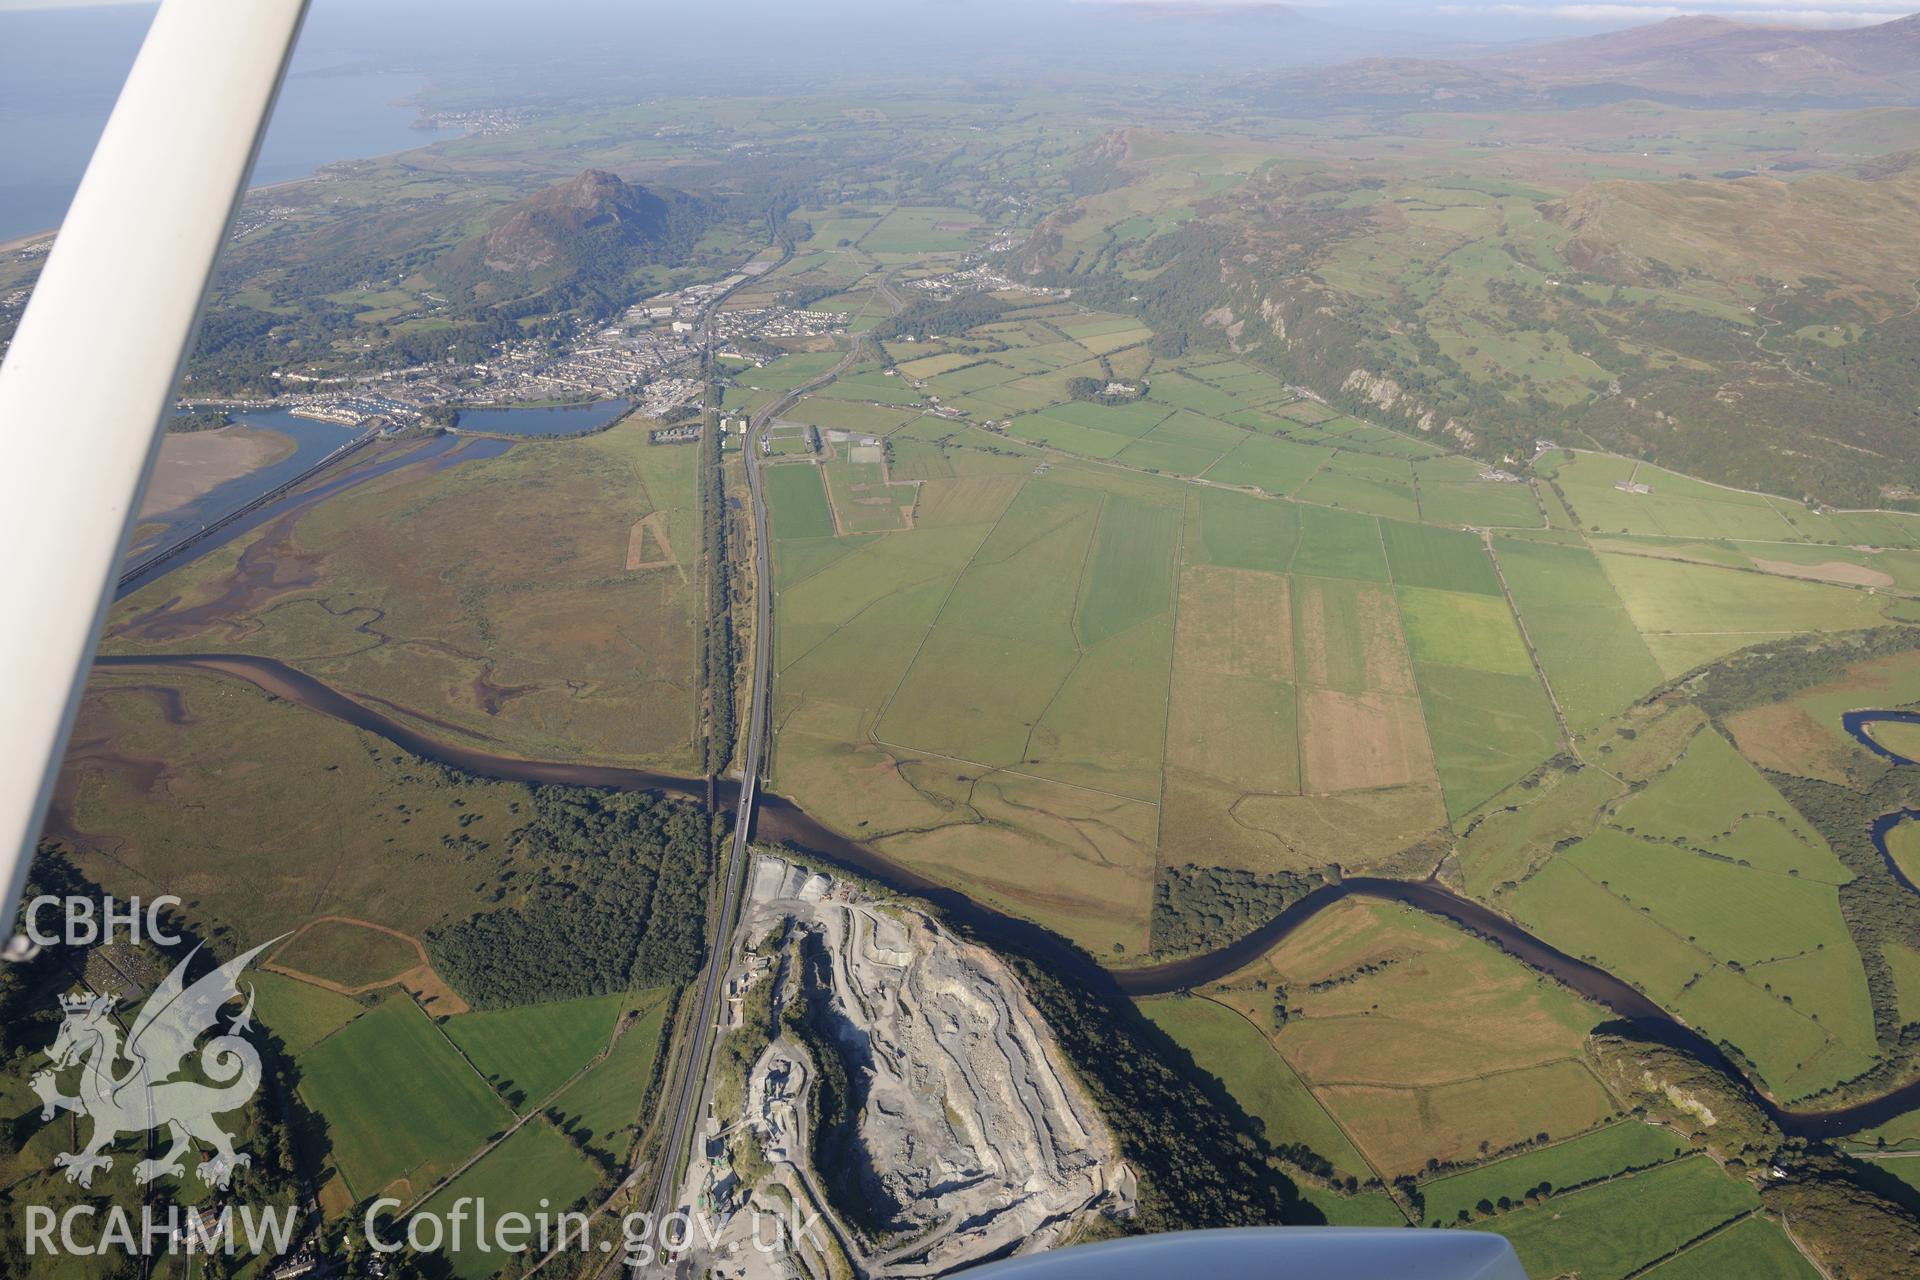 Ynys Gron granite quarry and the town of Porthmadog. Oblique aerial photograph taken during the Royal Commission's programme of archaeological aerial reconnaissance by Toby Driver on 2nd October 2015.